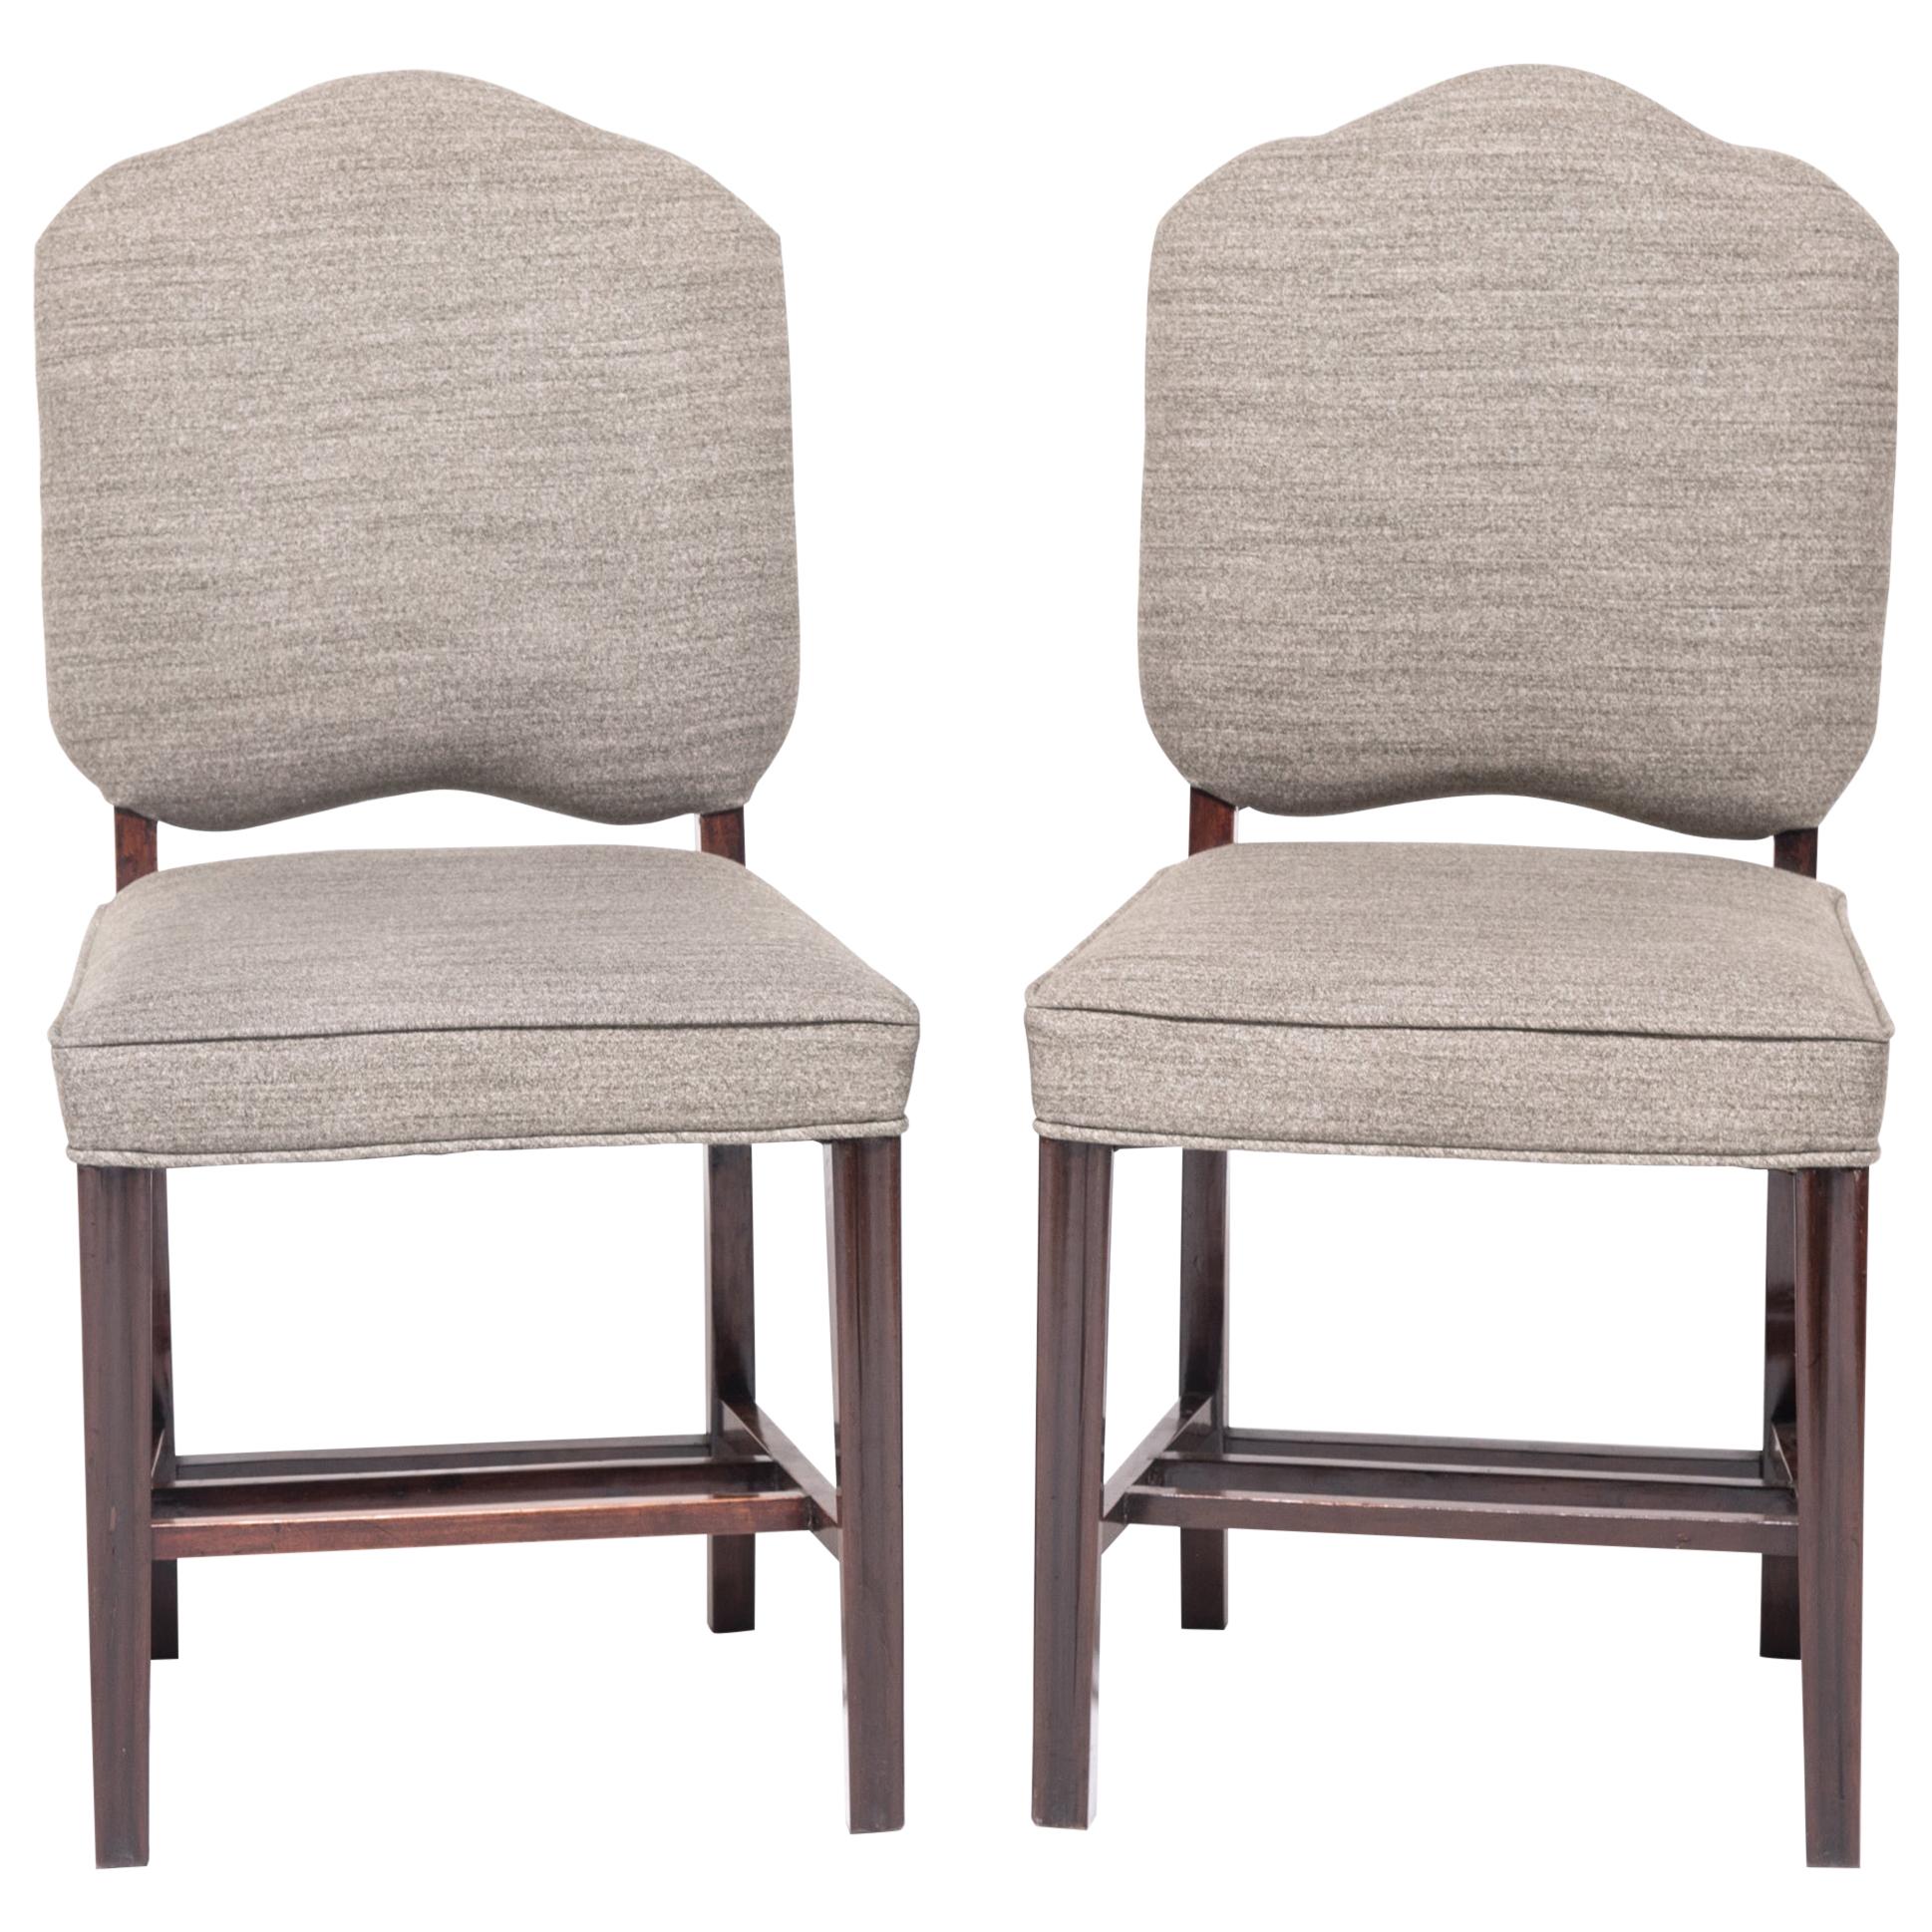 Pair of Chinese Art Deco Dining Chairs, circa 1920-1930s